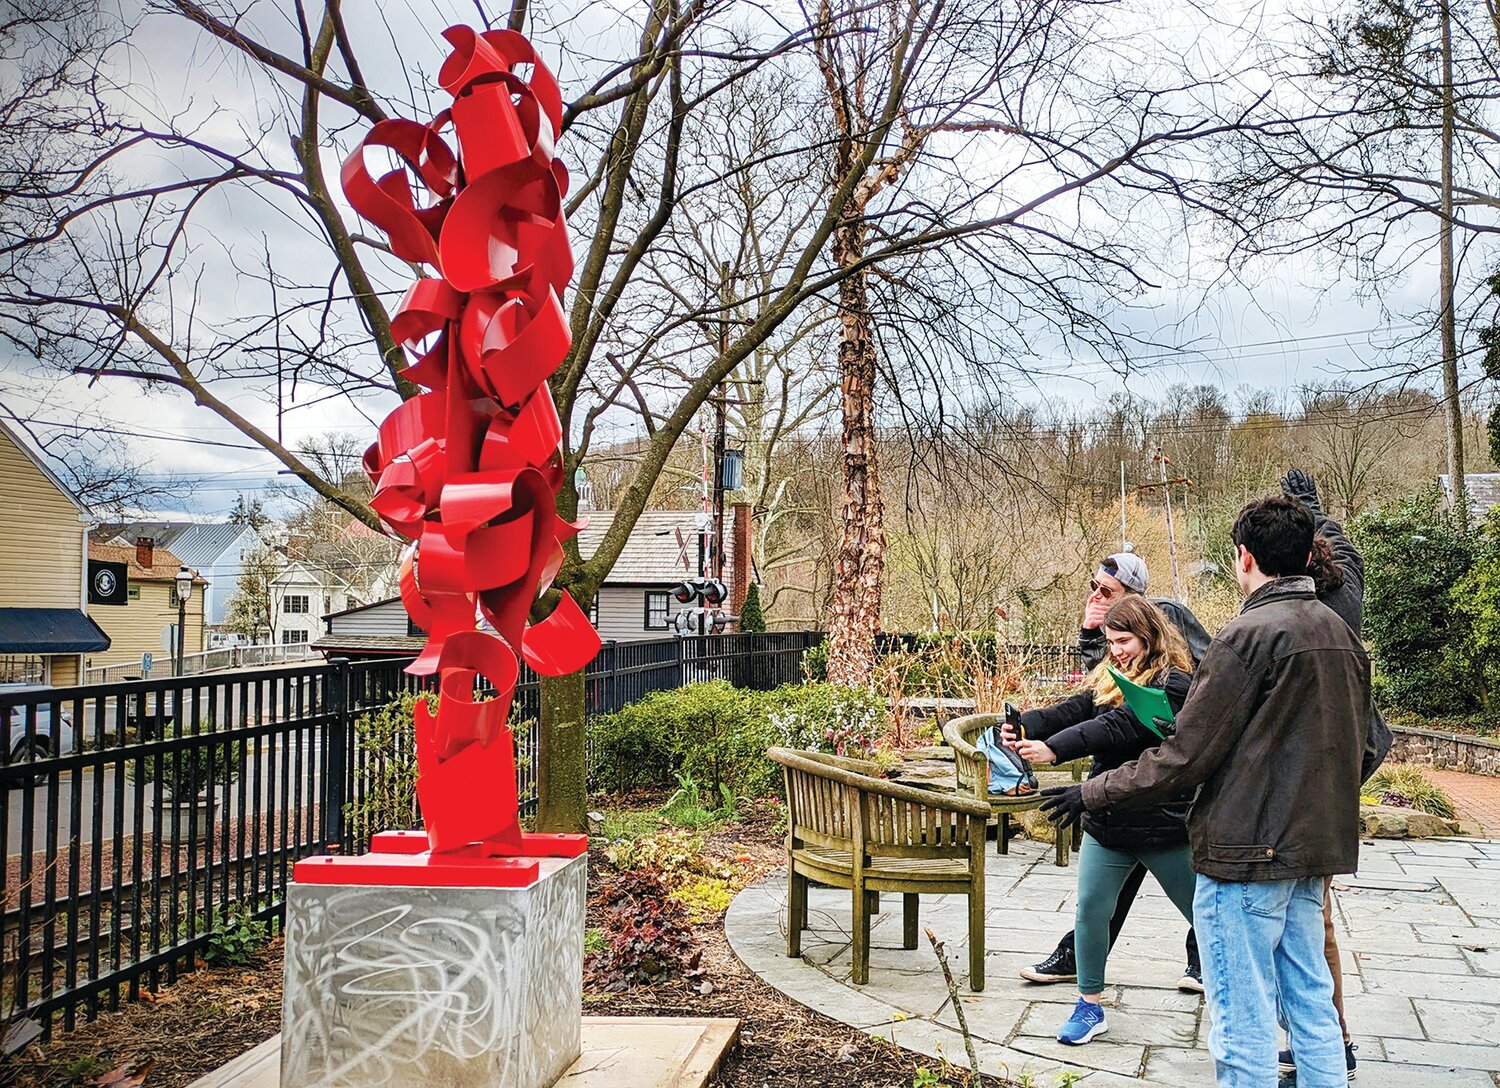 Visitors look at an outdoor sculpture in New Hope, part of the NHA Public Arts Program.